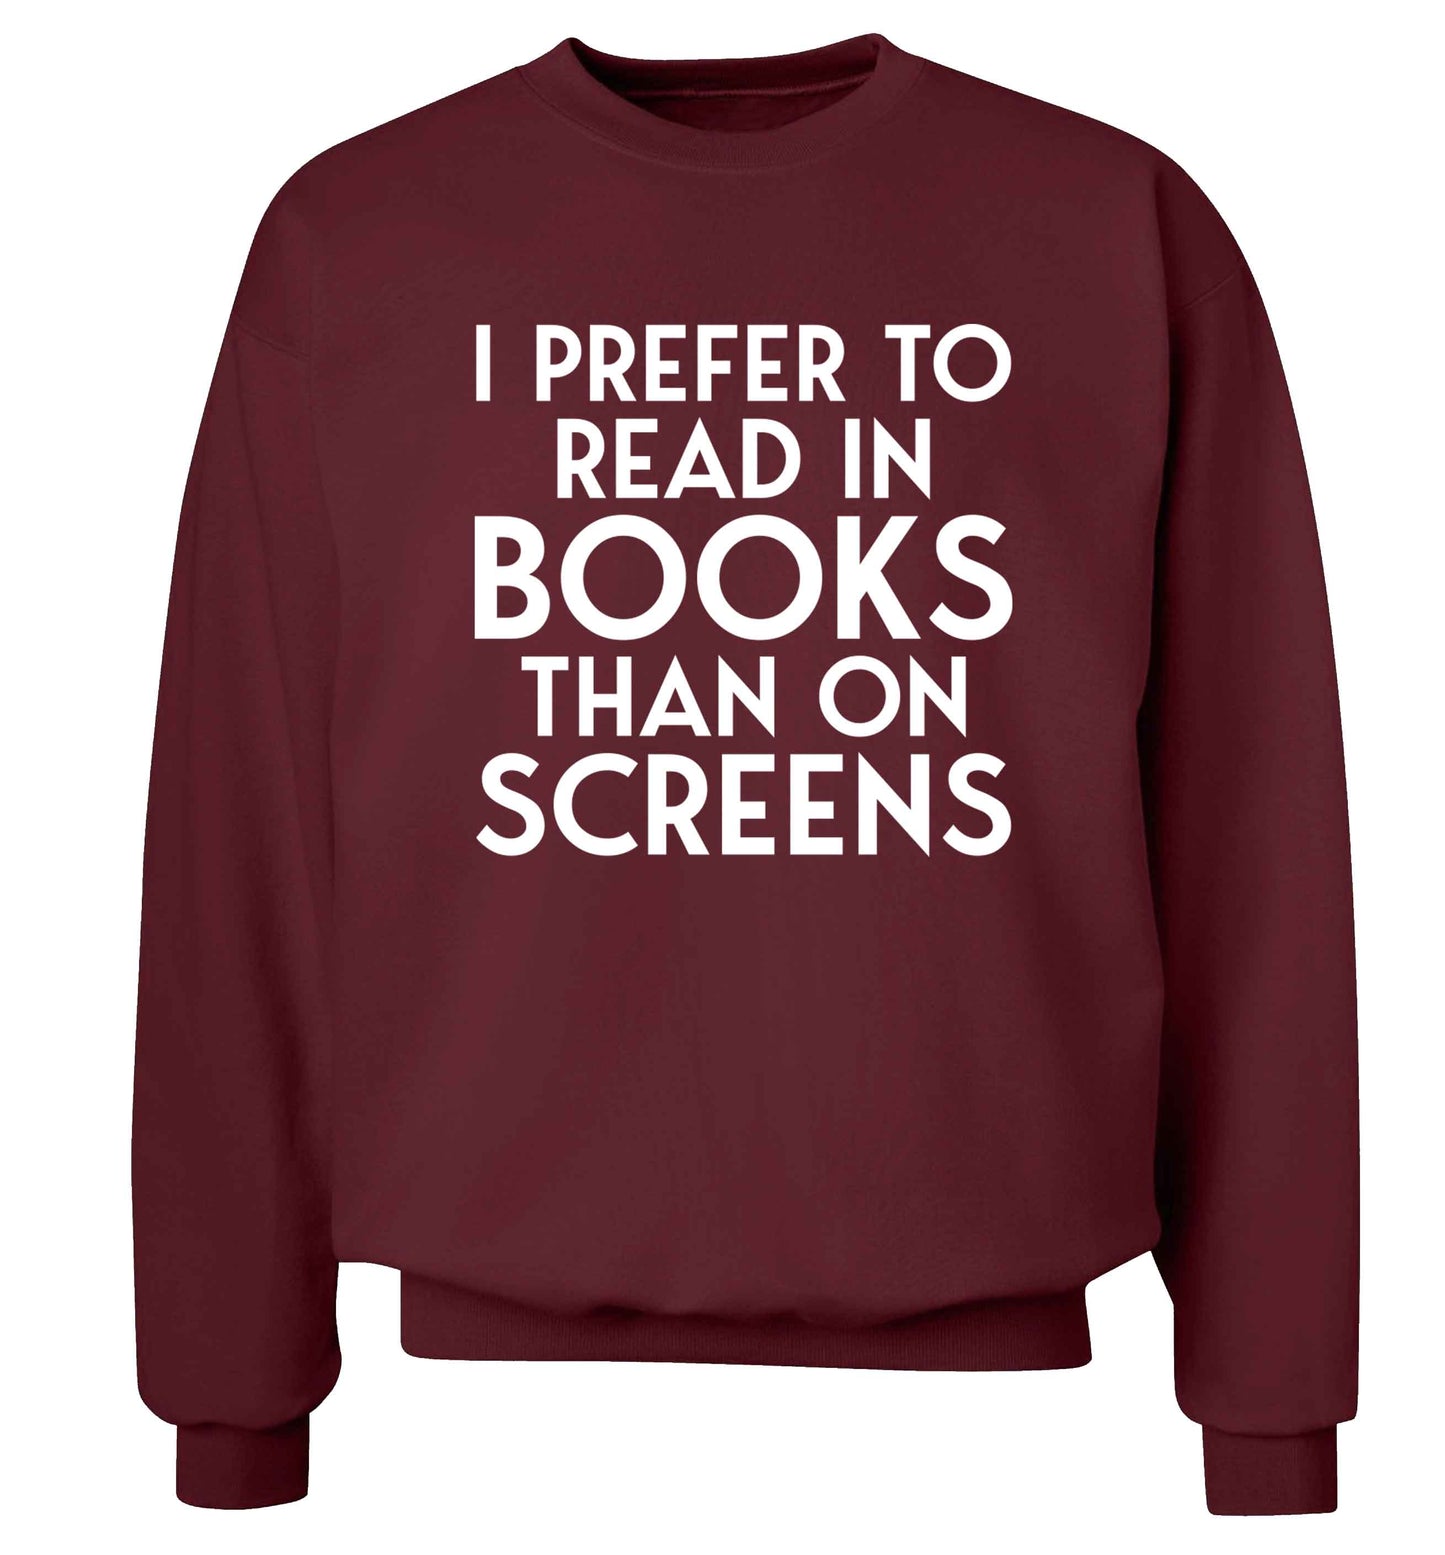 I prefer to read in books than on screens Adult's unisex maroon Sweater 2XL